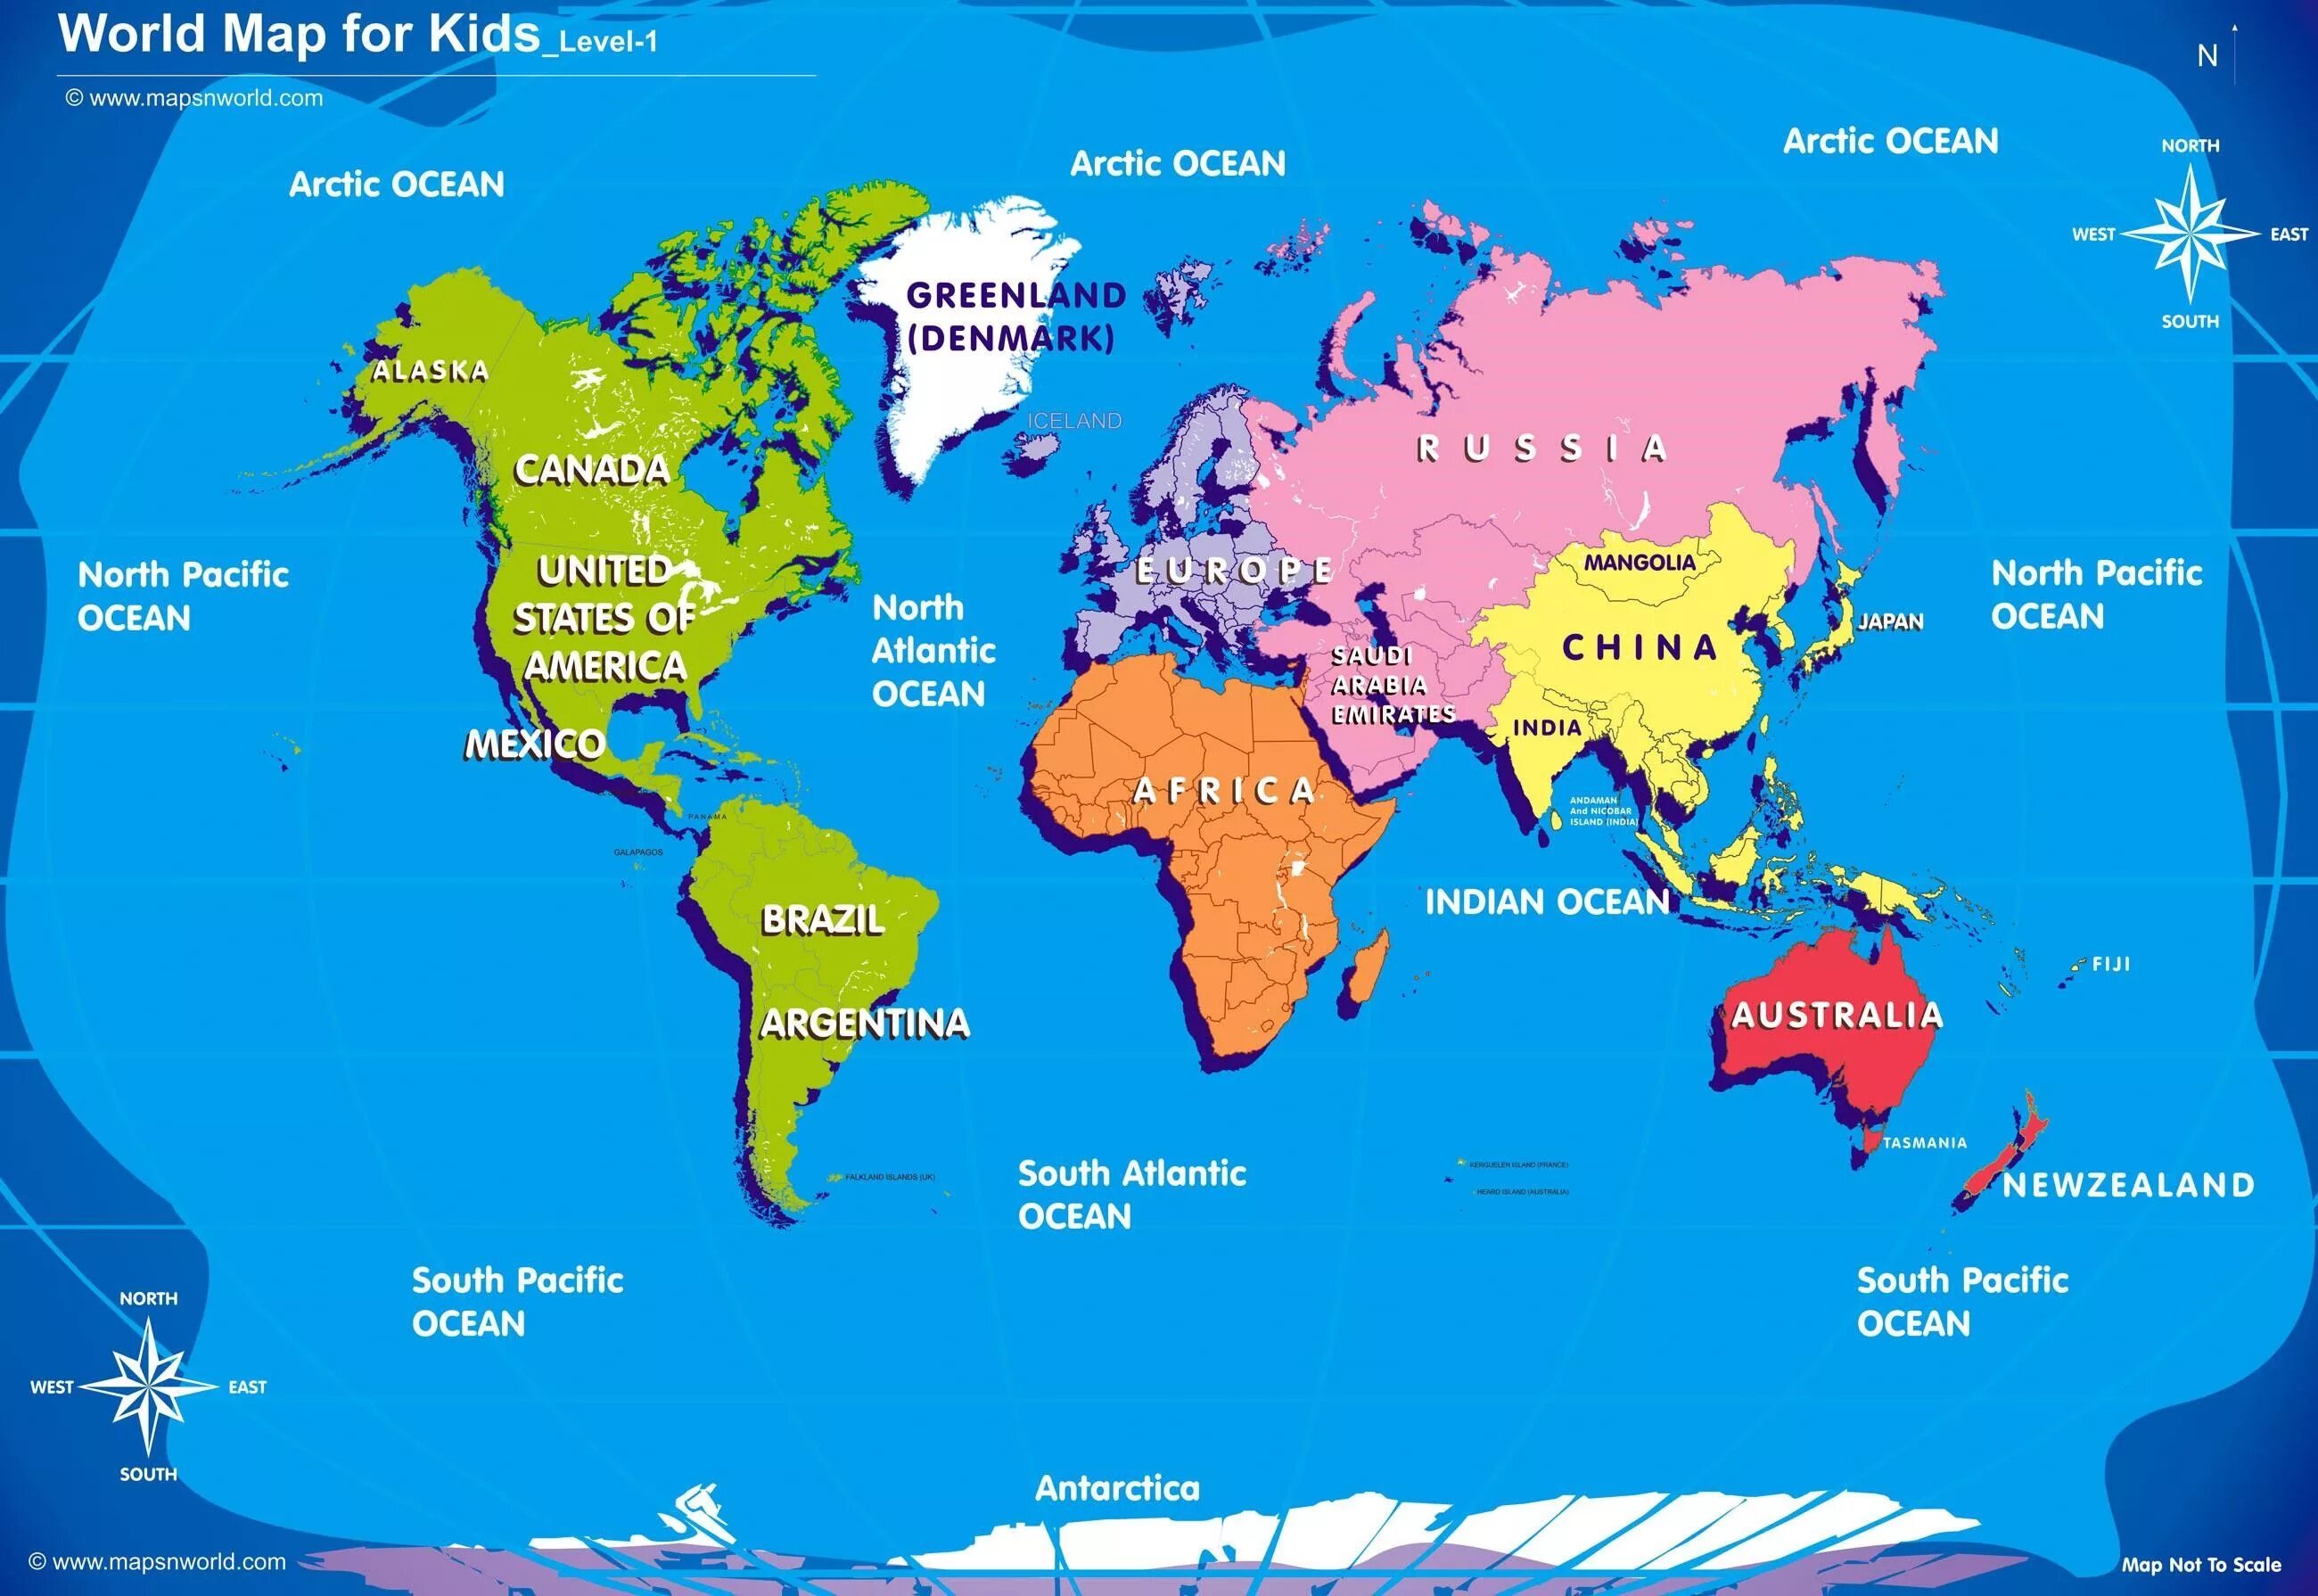 Card countries. World Map for Kids.